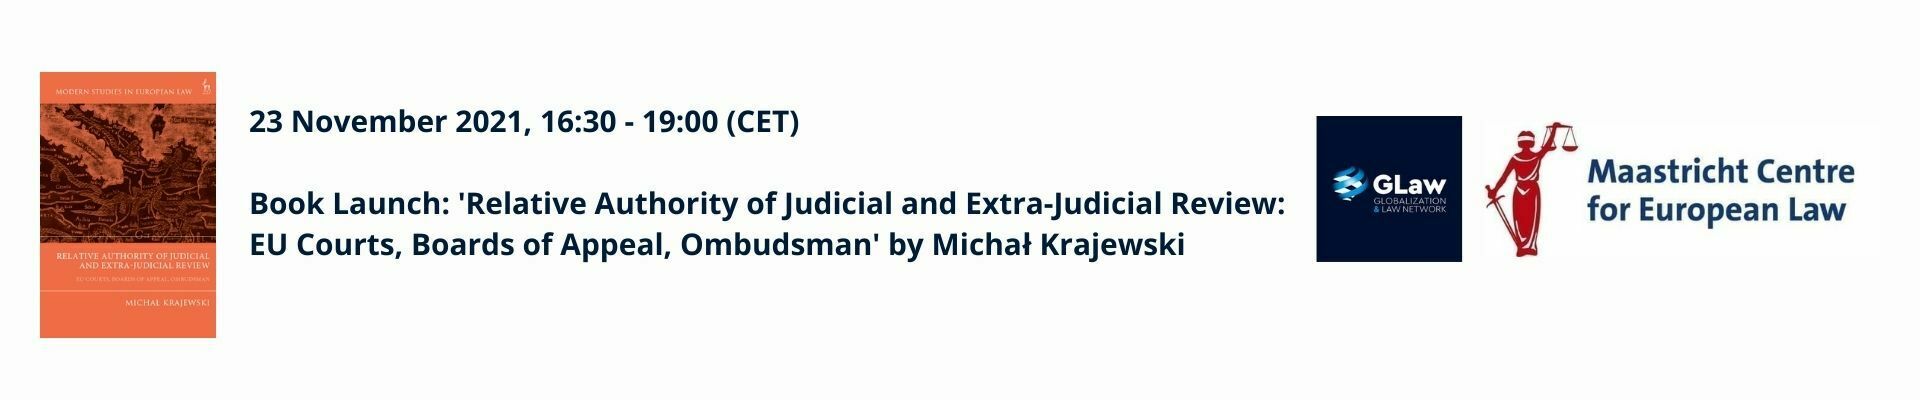 Book Launch: Relative Authority of Judicial and Extra-Judicial Review: EU Courts, Boards of Appeal, Ombudsman